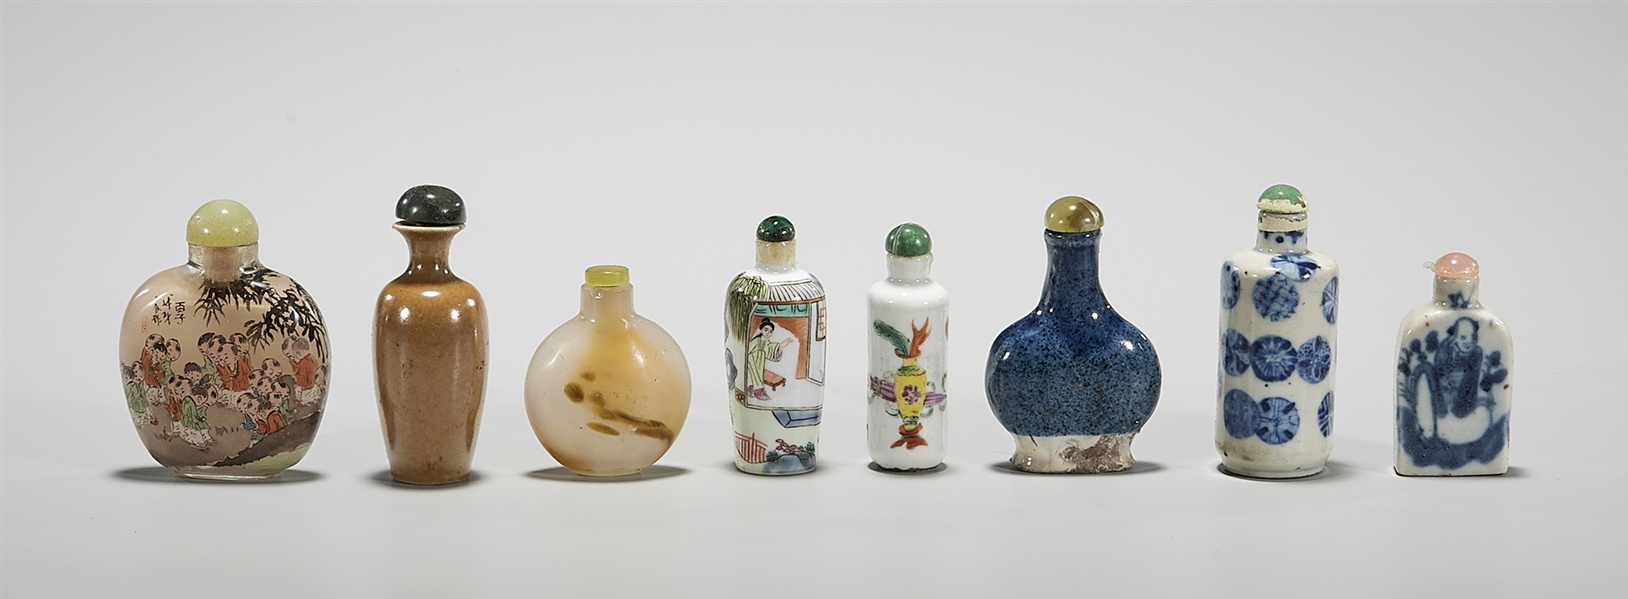 Group of Eight Various Chinese Snuff Bottles